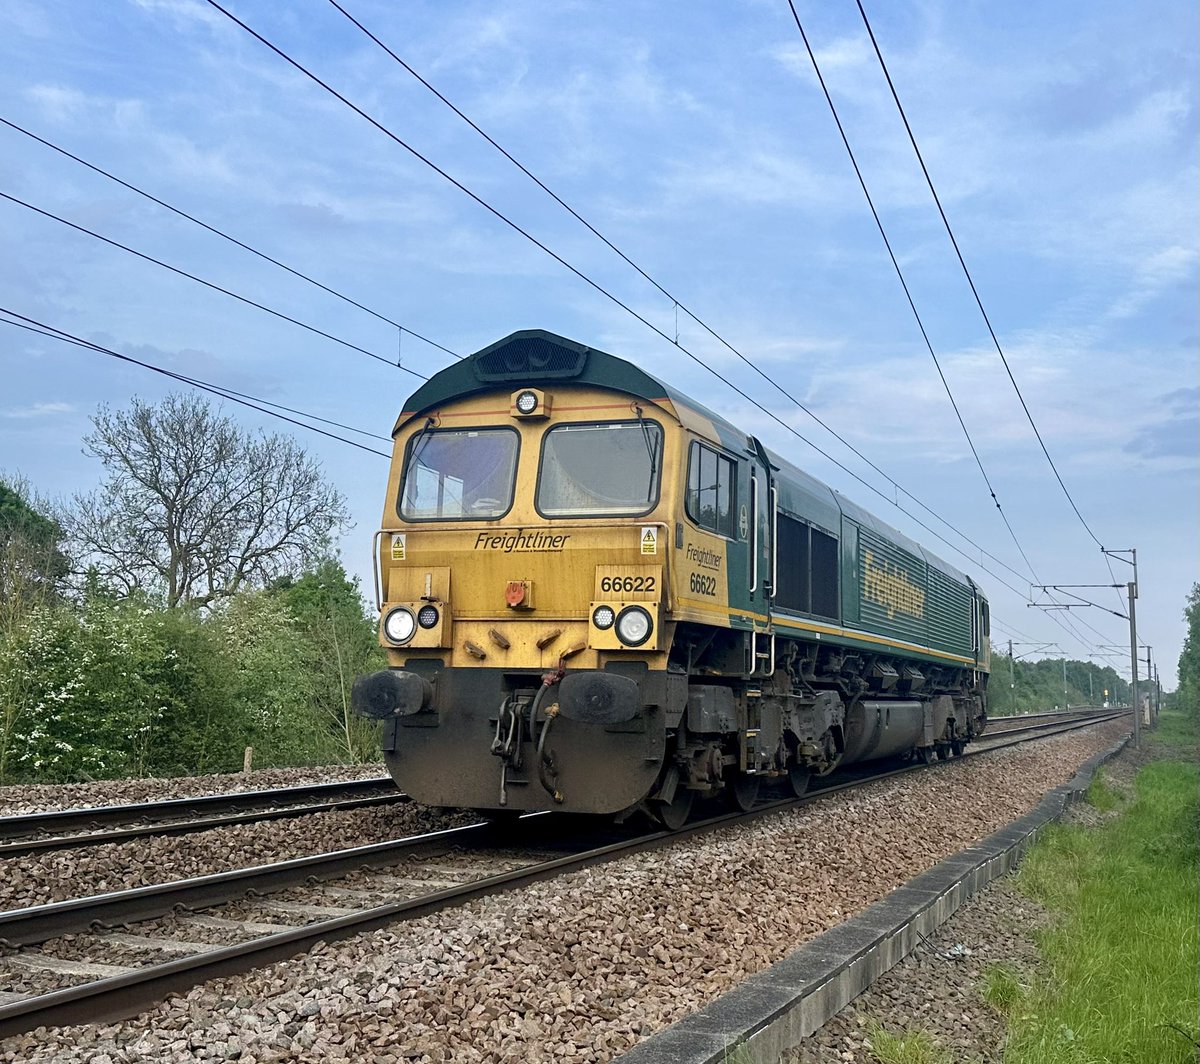 66622 at Crofton on todays 0Y33 Belmont - Balm Rd #class66